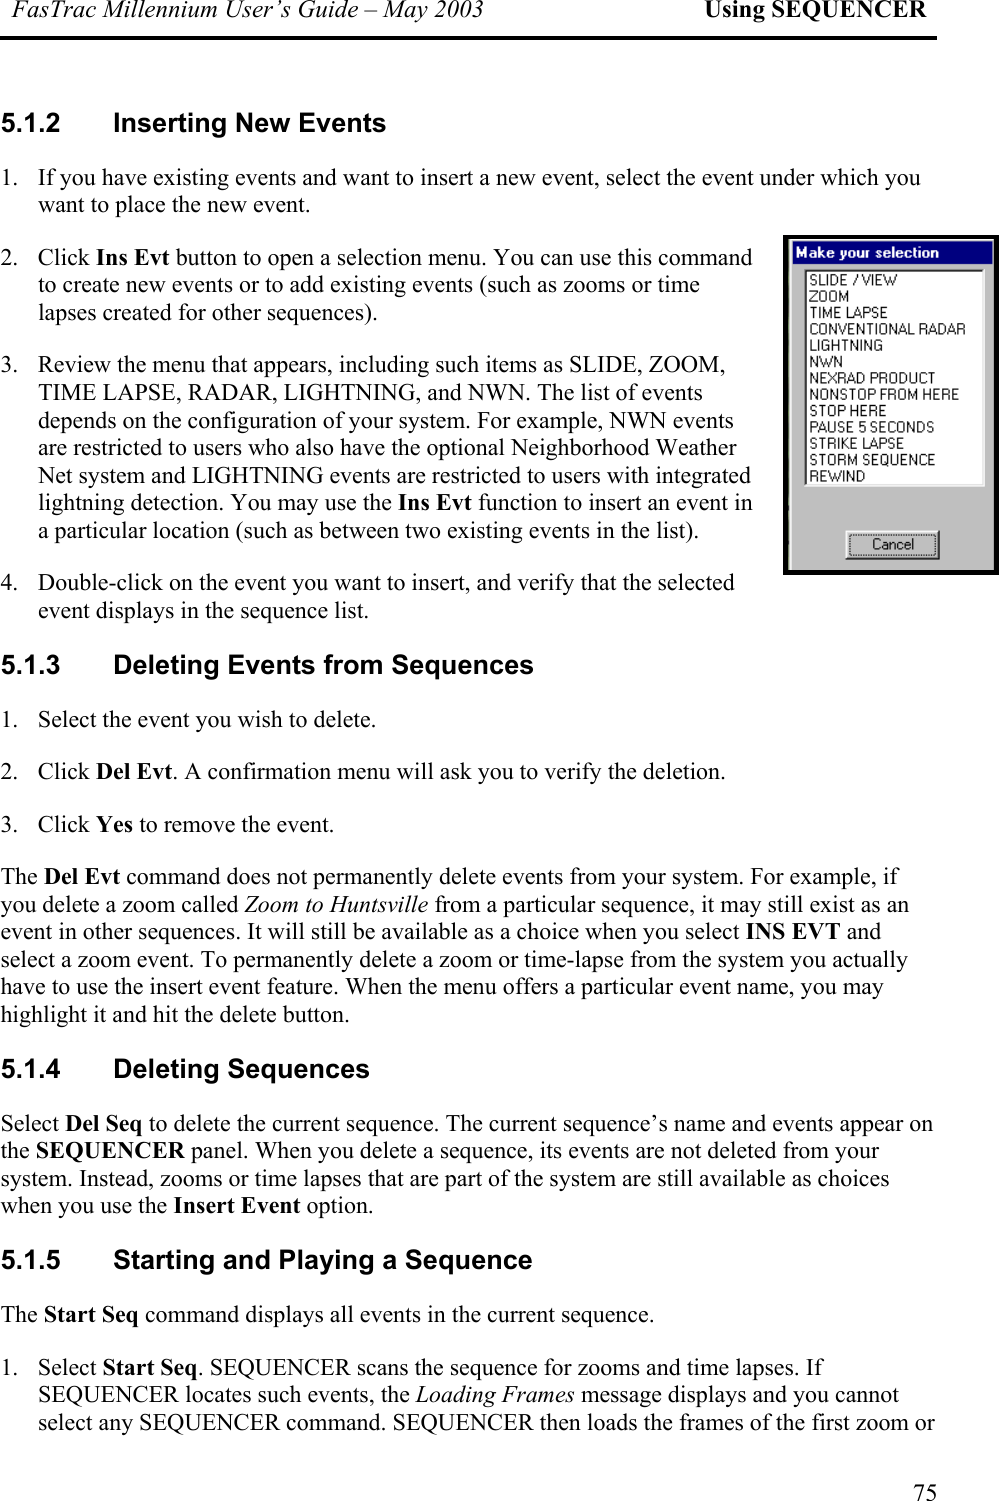 FasTrac Millennium User’s Guide – May 2003 Using SEQUENCER 5.1.2  Inserting New Events 1.  If you have existing events and want to insert a new event, select the event under which you want to place the new event. 2. Click Ins Evt button to open a selection menu. You can use this command to create new events or to add existing events (such as zooms or time lapses created for other sequences). 3.  Review the menu that appears, including such items as SLIDE, ZOOM, TIME LAPSE, RADAR, LIGHTNING, and NWN. The list of events depends on the configuration of your system. For example, NWN events are restricted to users who also have the optional Neighborhood Weather Net system and LIGHTNING events are restricted to users with integrated lightning detection. You may use the Ins Evt function to insert an event in a particular location (such as between two existing events in the list).  4.  Double-click on the event you want to insert, and verify that the selected event displays in the sequence list.  5.1.3  Deleting Events from Sequences 1.  Select the event you wish to delete. 2. Click Del Evt. A confirmation menu will ask you to verify the deletion.  3. Click Yes to remove the event. The Del Evt command does not permanently delete events from your system. For example, if you delete a zoom called Zoom to Huntsville from a particular sequence, it may still exist as an event in other sequences. It will still be available as a choice when you select INS EVT and select a zoom event. To permanently delete a zoom or time-lapse from the system you actually have to use the insert event feature. When the menu offers a particular event name, you may highlight it and hit the delete button. 5.1.4 Deleting Sequences Select Del Seq to delete the current sequence. The current sequence’s name and events appear on the SEQUENCER panel. When you delete a sequence, its events are not deleted from your system. Instead, zooms or time lapses that are part of the system are still available as choices when you use the Insert Event option. 5.1.5 Starting and Playing a Sequence The Start Seq command displays all events in the current sequence.  1. Select Start Seq. SEQUENCER scans the sequence for zooms and time lapses. If SEQUENCER locates such events, the Loading Frames message displays and you cannot select any SEQUENCER command. SEQUENCER then loads the frames of the first zoom or 75 